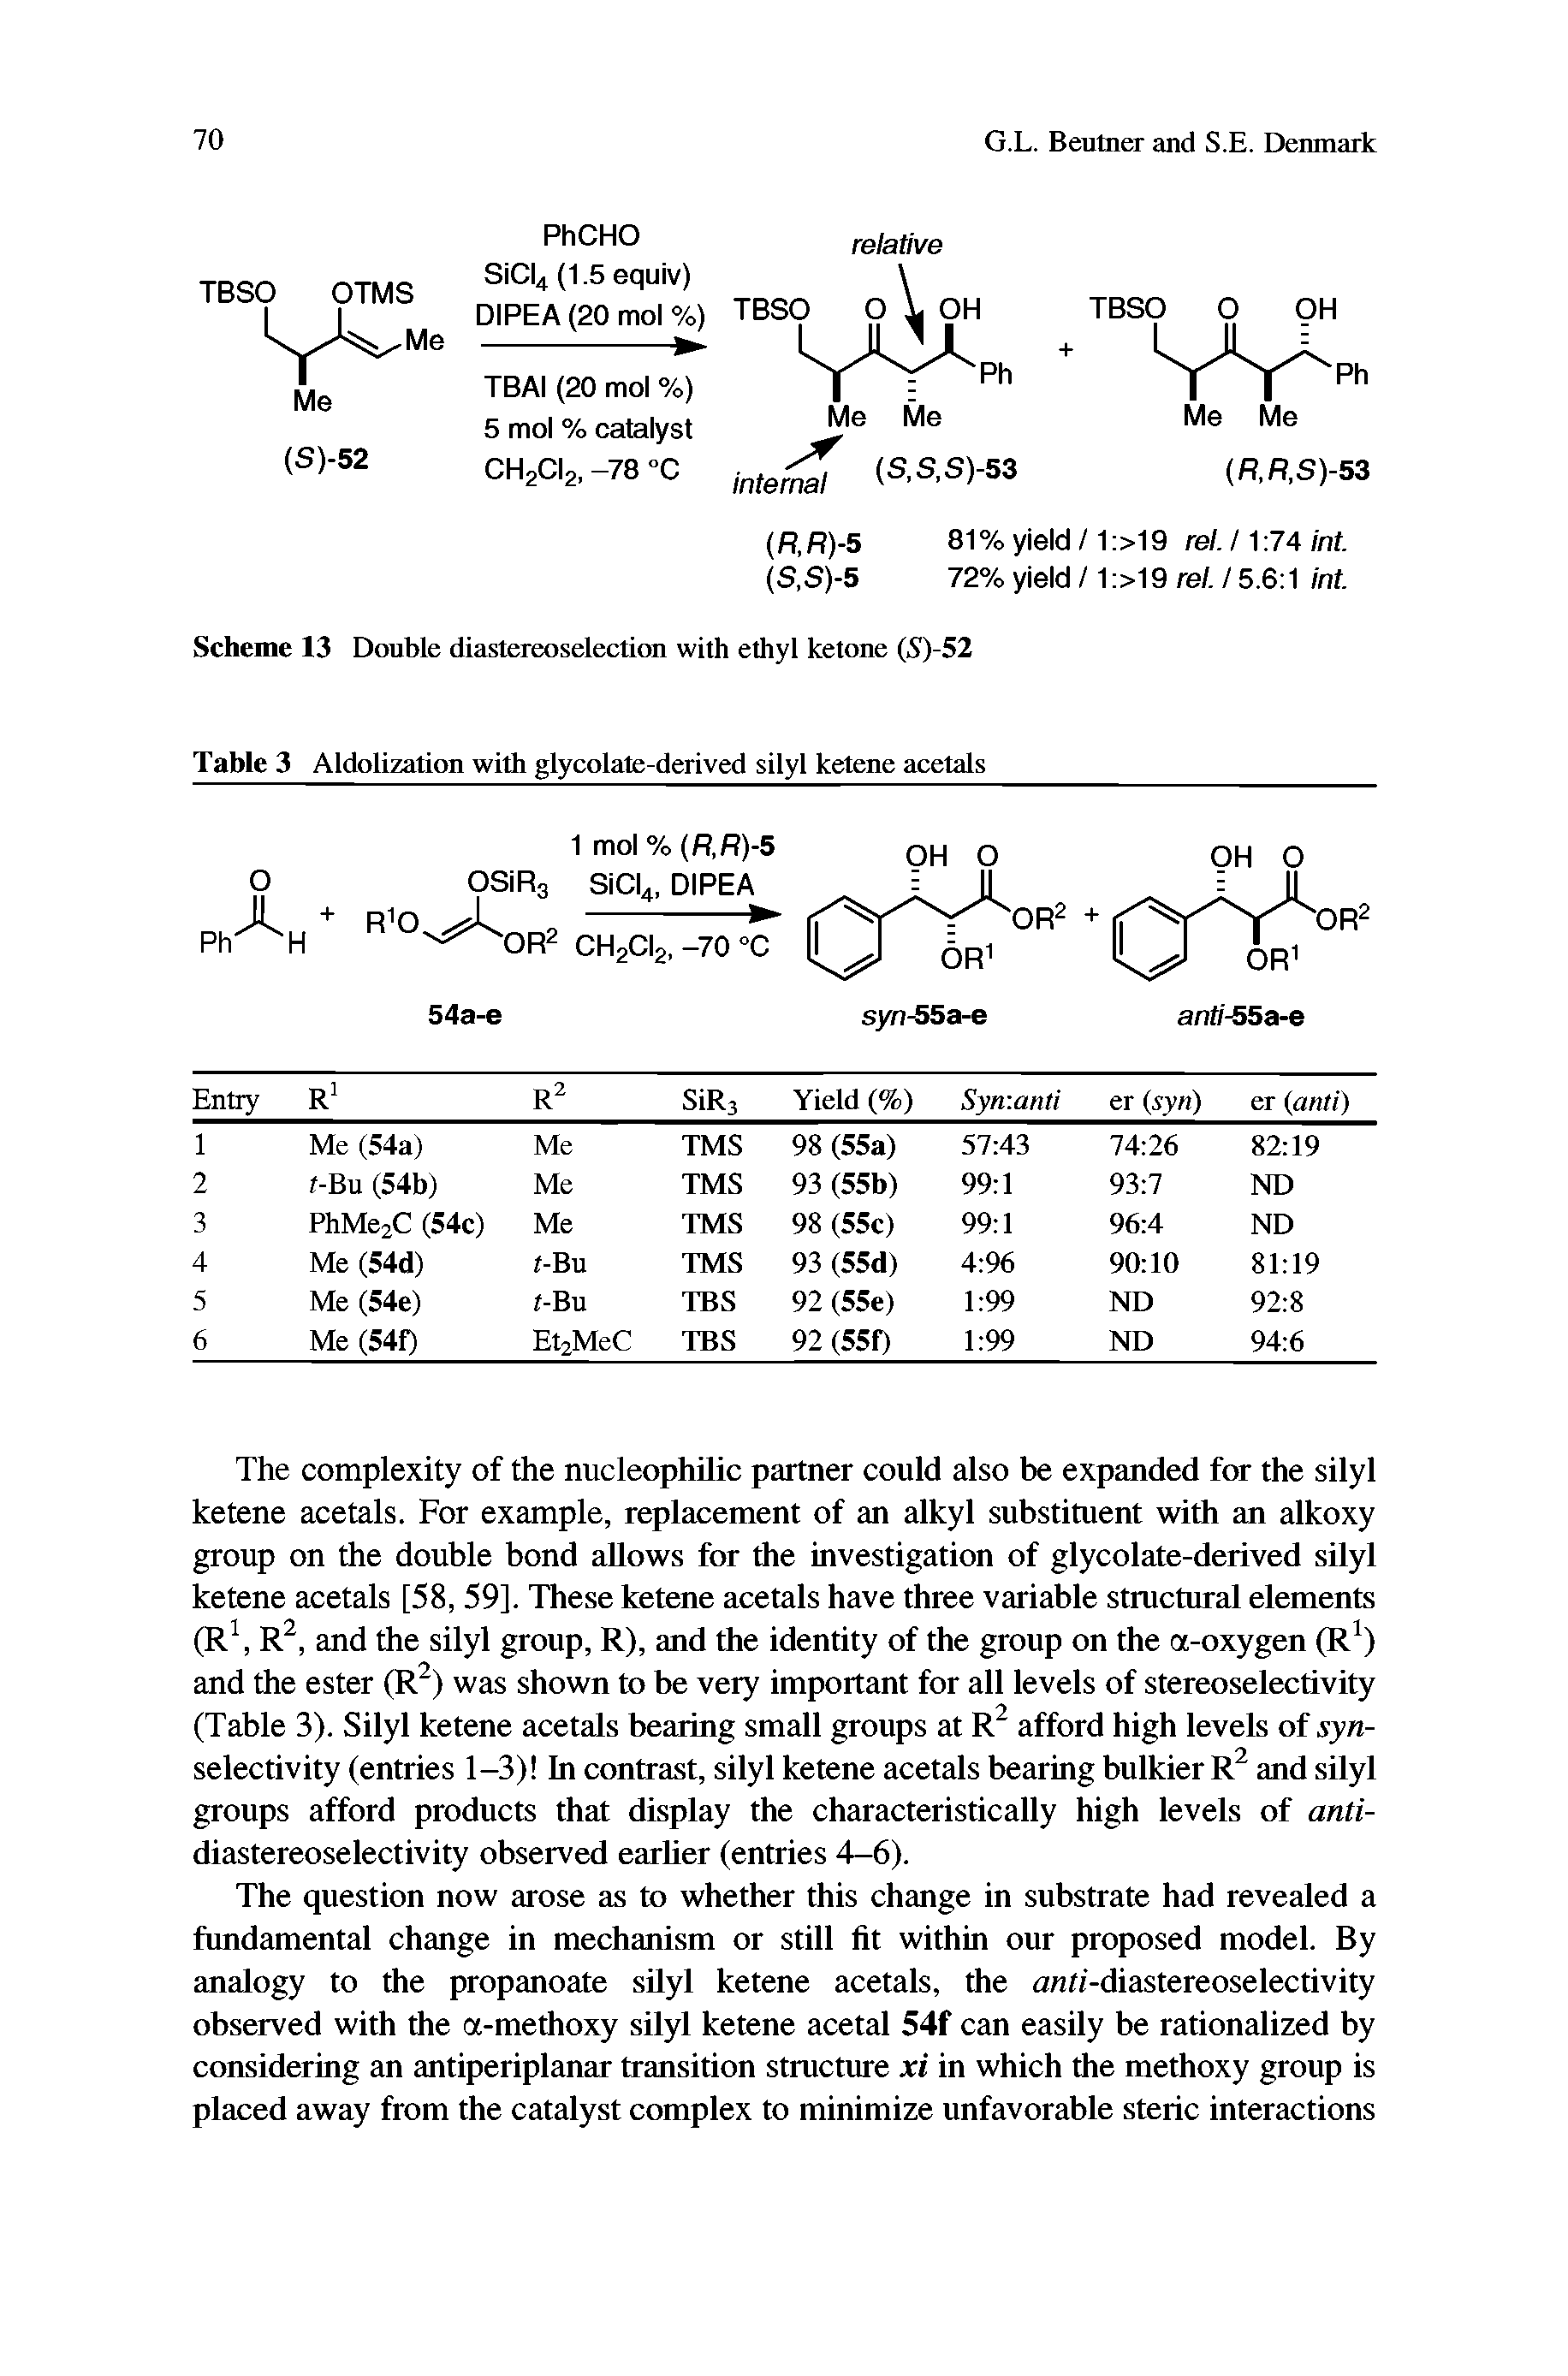 Table 3 Aldolization with glycolate-derived silyl ketene acetals...